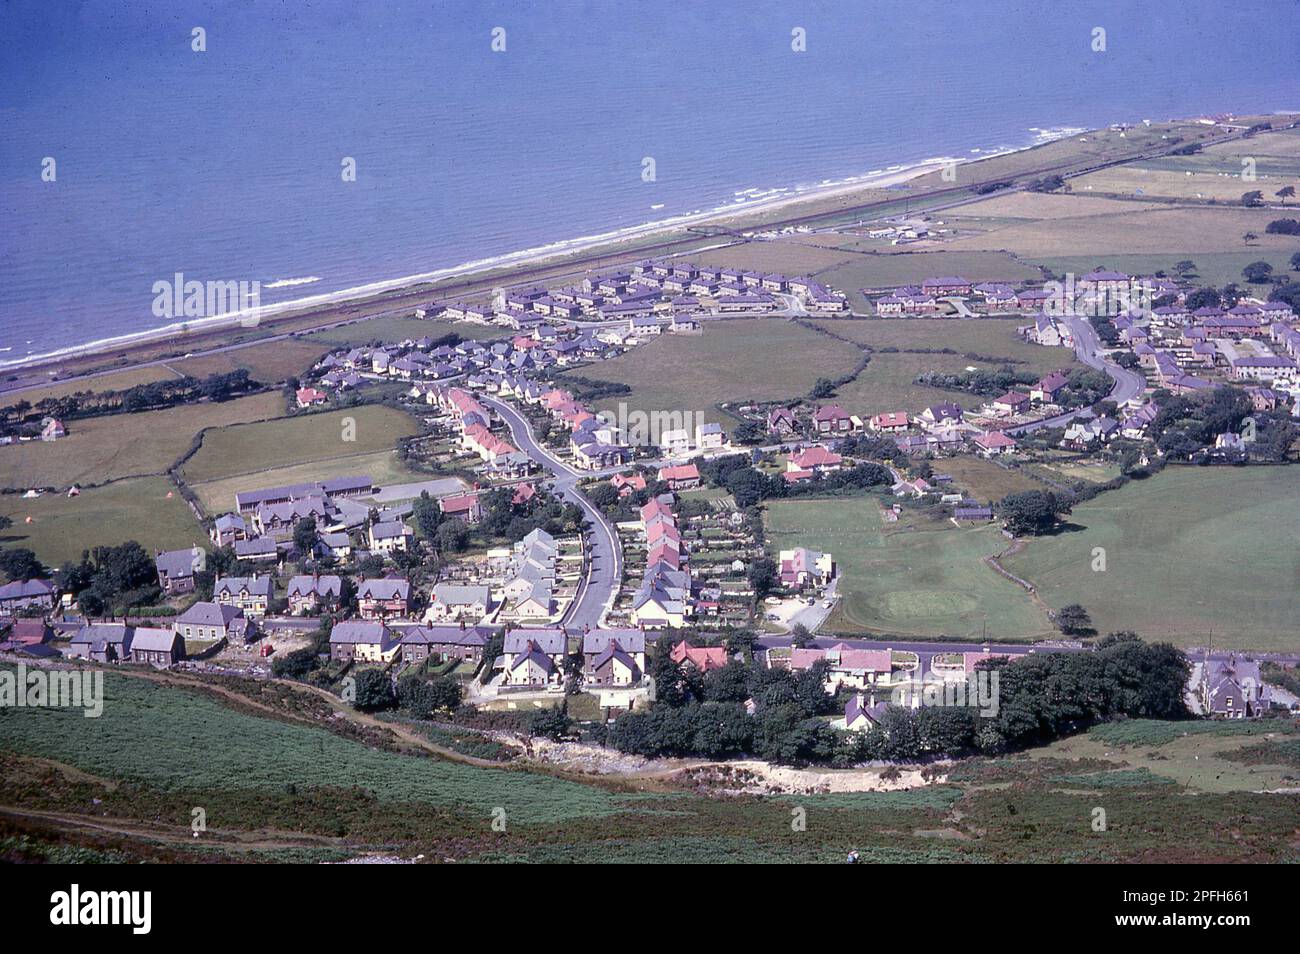 1964, historical, aerial view over the coastal town of Penmaenmawr, Conwy, Wales, as seen from the high mountain, which the town is named after. Stock Photo